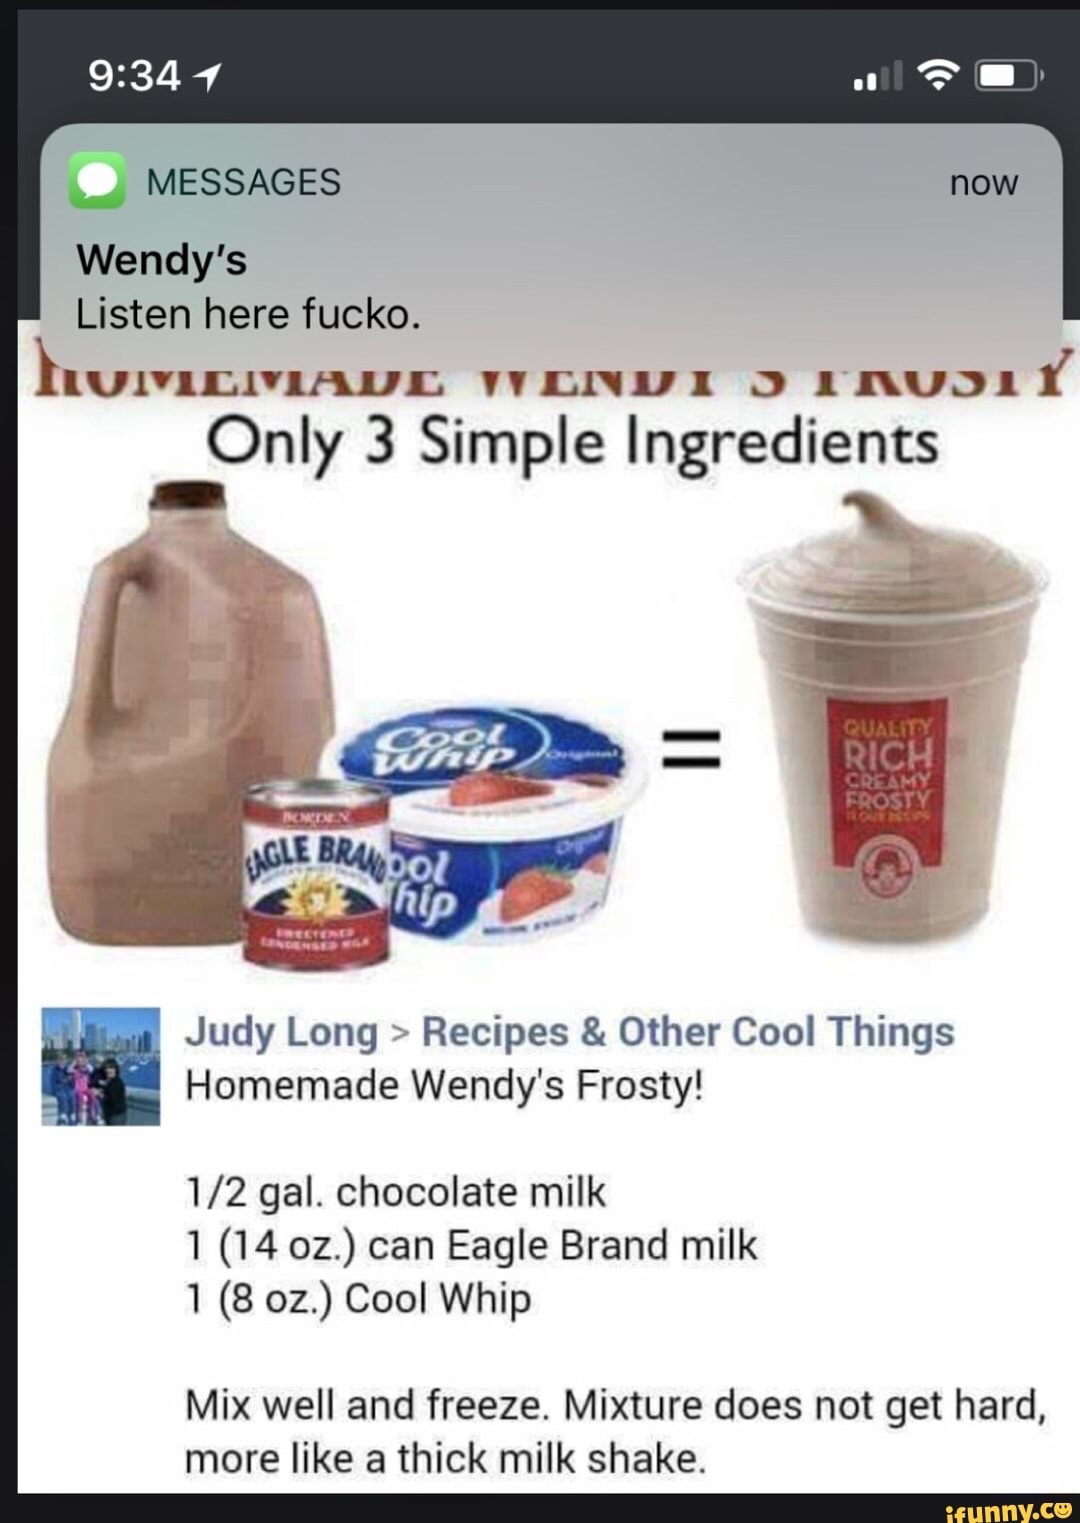 wendys frosty recipe - 1 Messages now Wendy's Listen here fucko. Lluiviliviadc Wycidi Sinusi 1 Only 3 Simple Ingredients Quality Rica Rosty Agle Bra Dol Chip Judy Long > Recipes & Other Cool Things Homemade Wendy's Frosty! 12 gal. chocolate milk 1 14 oz. 